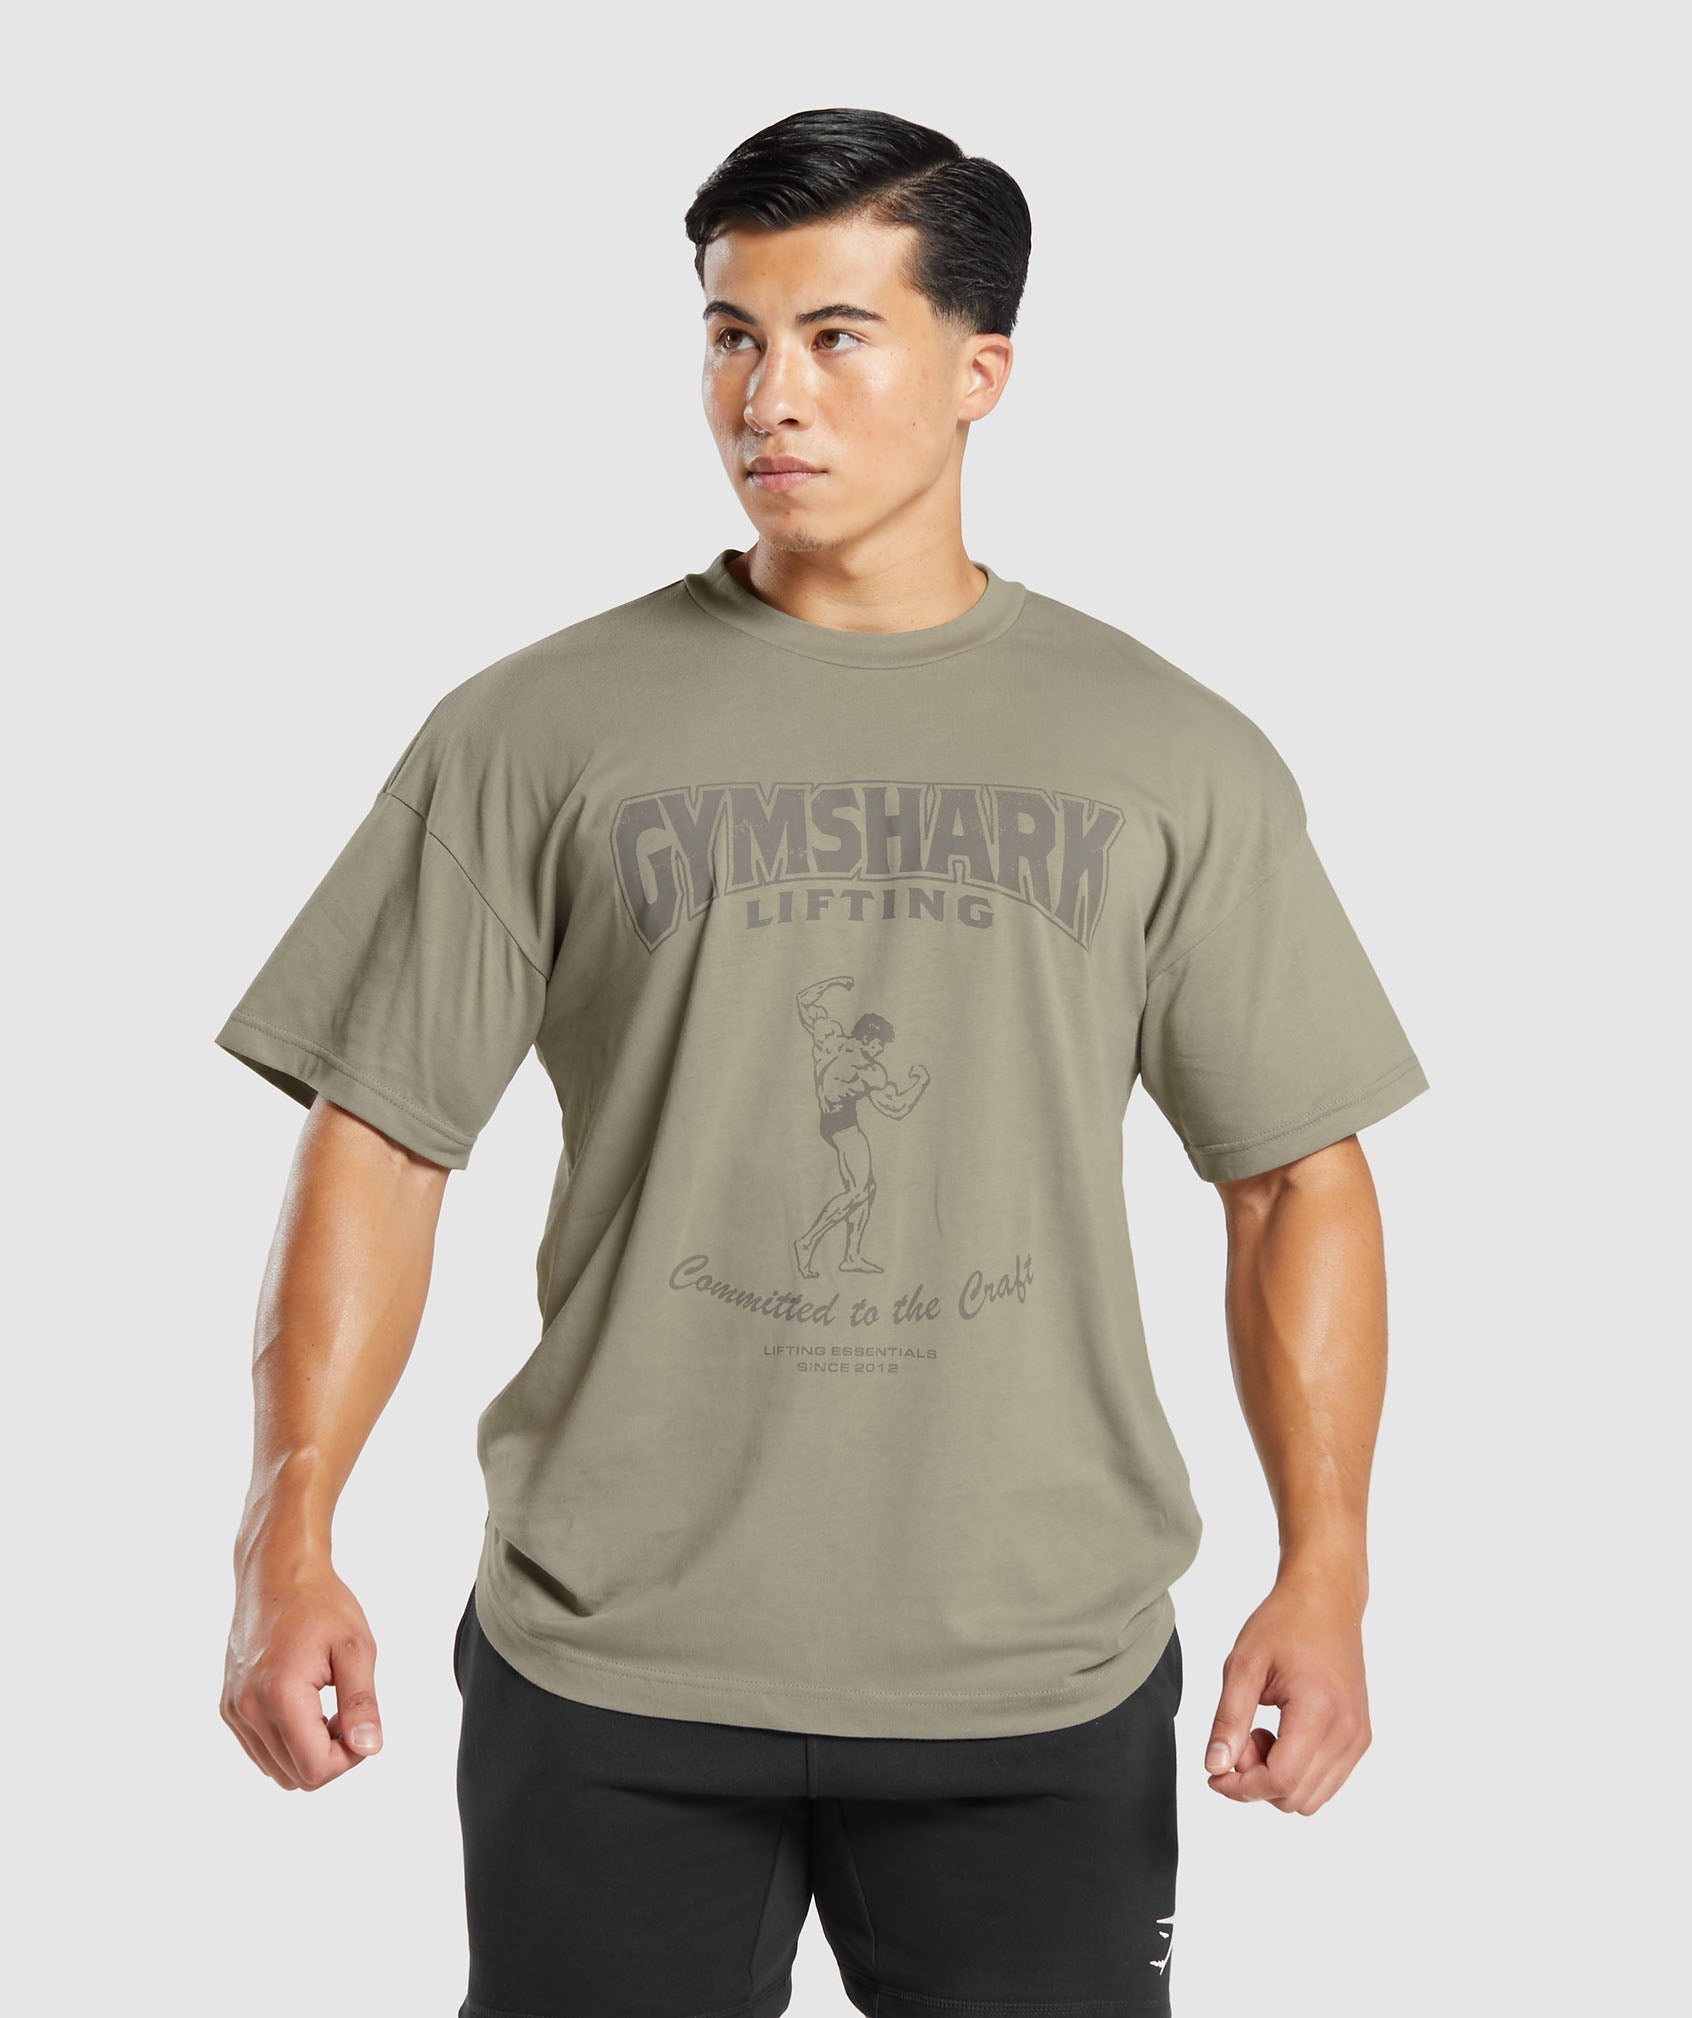 Committed to the Craft T-Shirt in {{variantColor} is out of stock